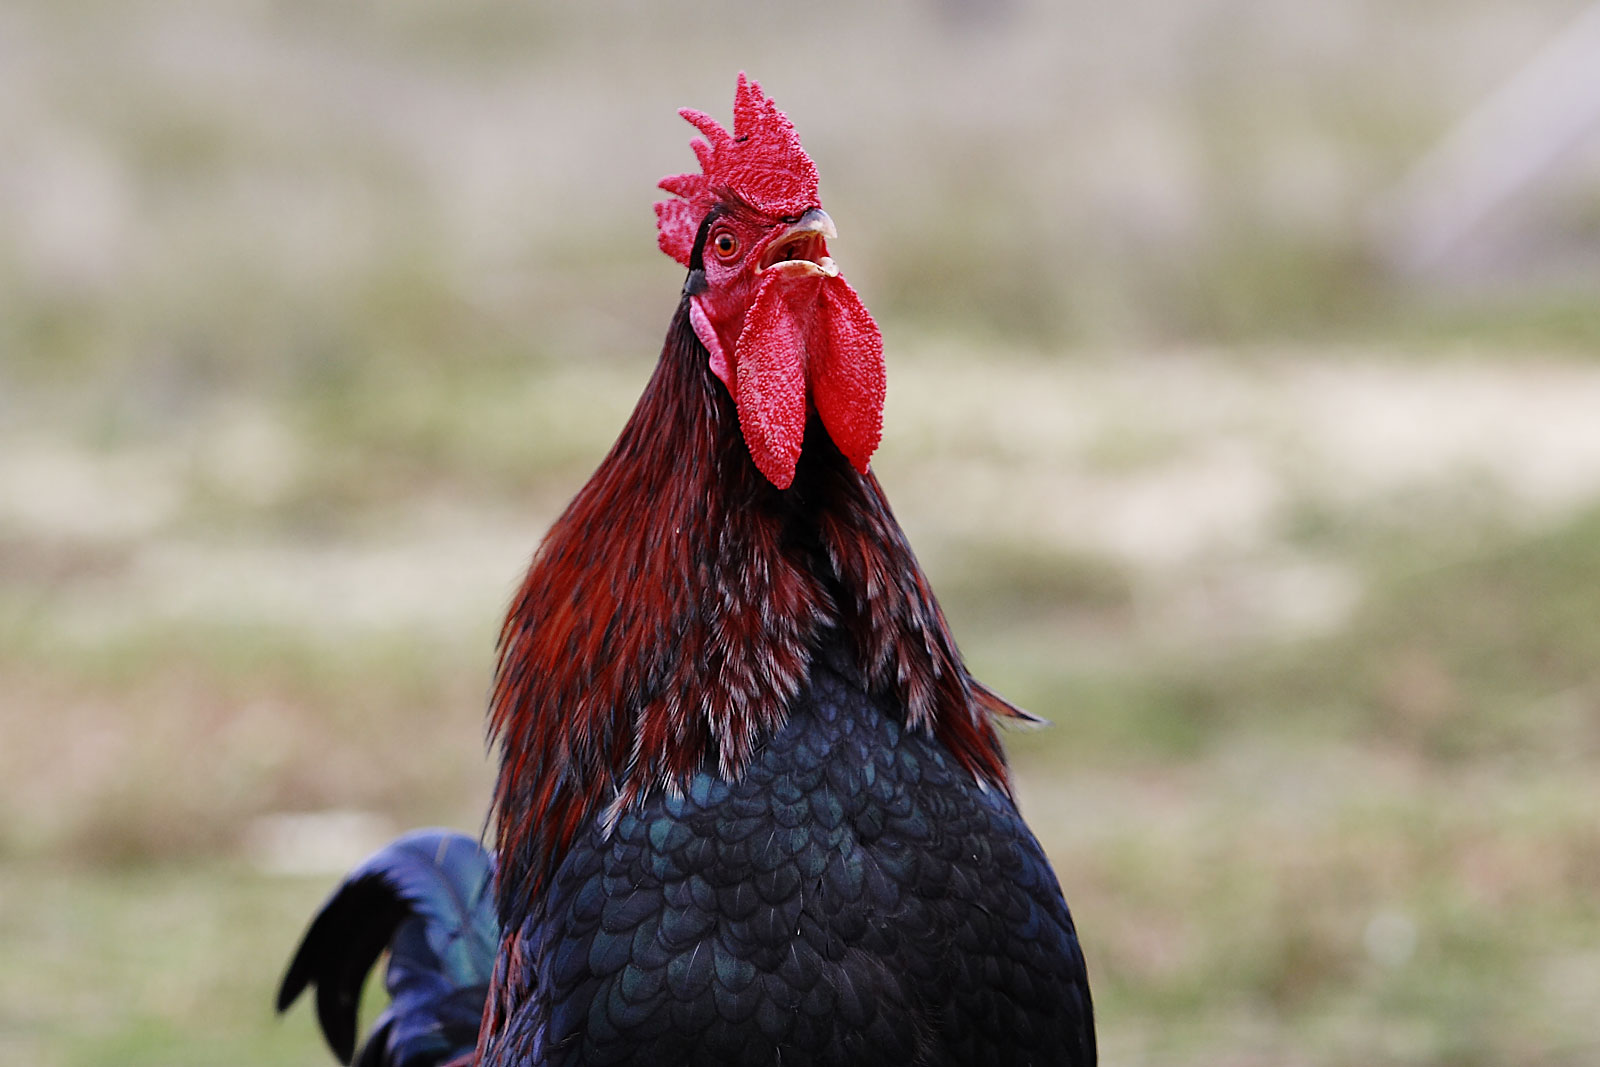 File:Rooster crowing.jpg - Wikimedia Commons